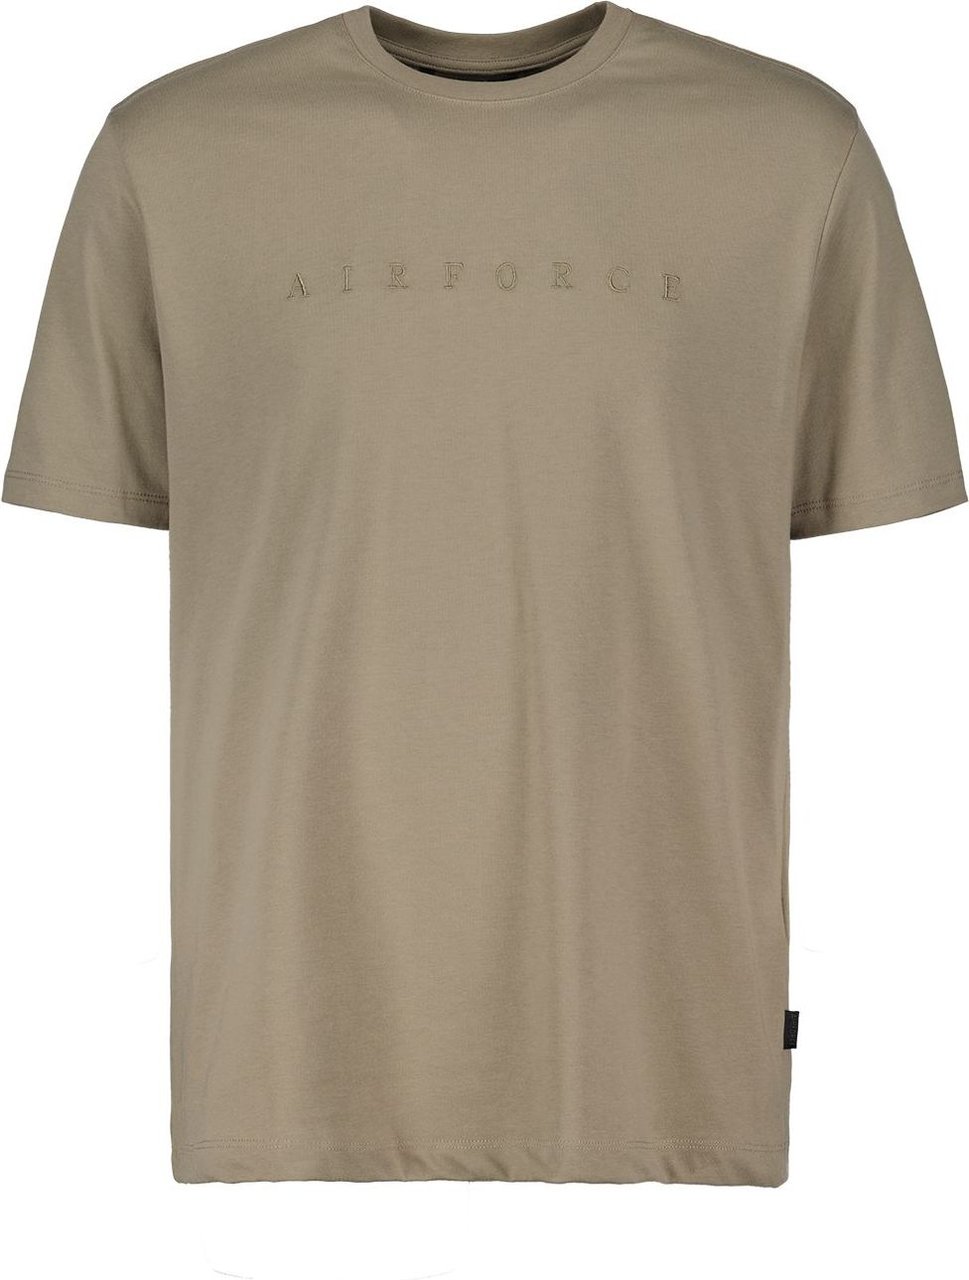 Airforce Airforce Embroidery T-shirt Beige